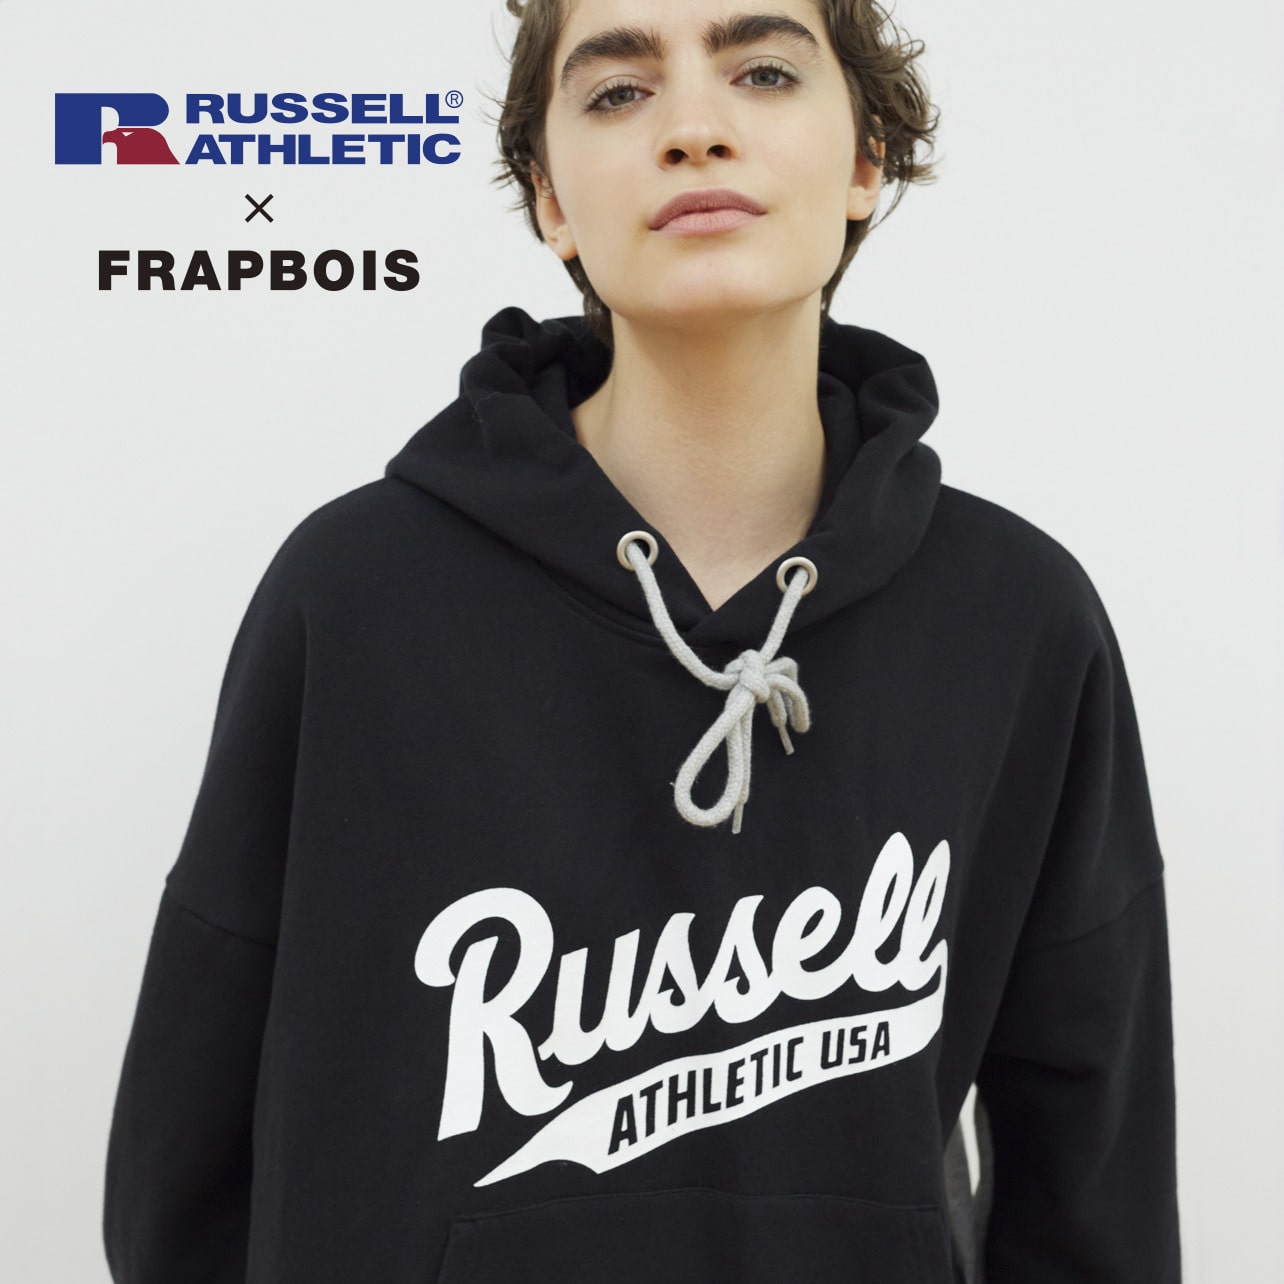 RUSSELL ATHLETIC × FRAPBOIS